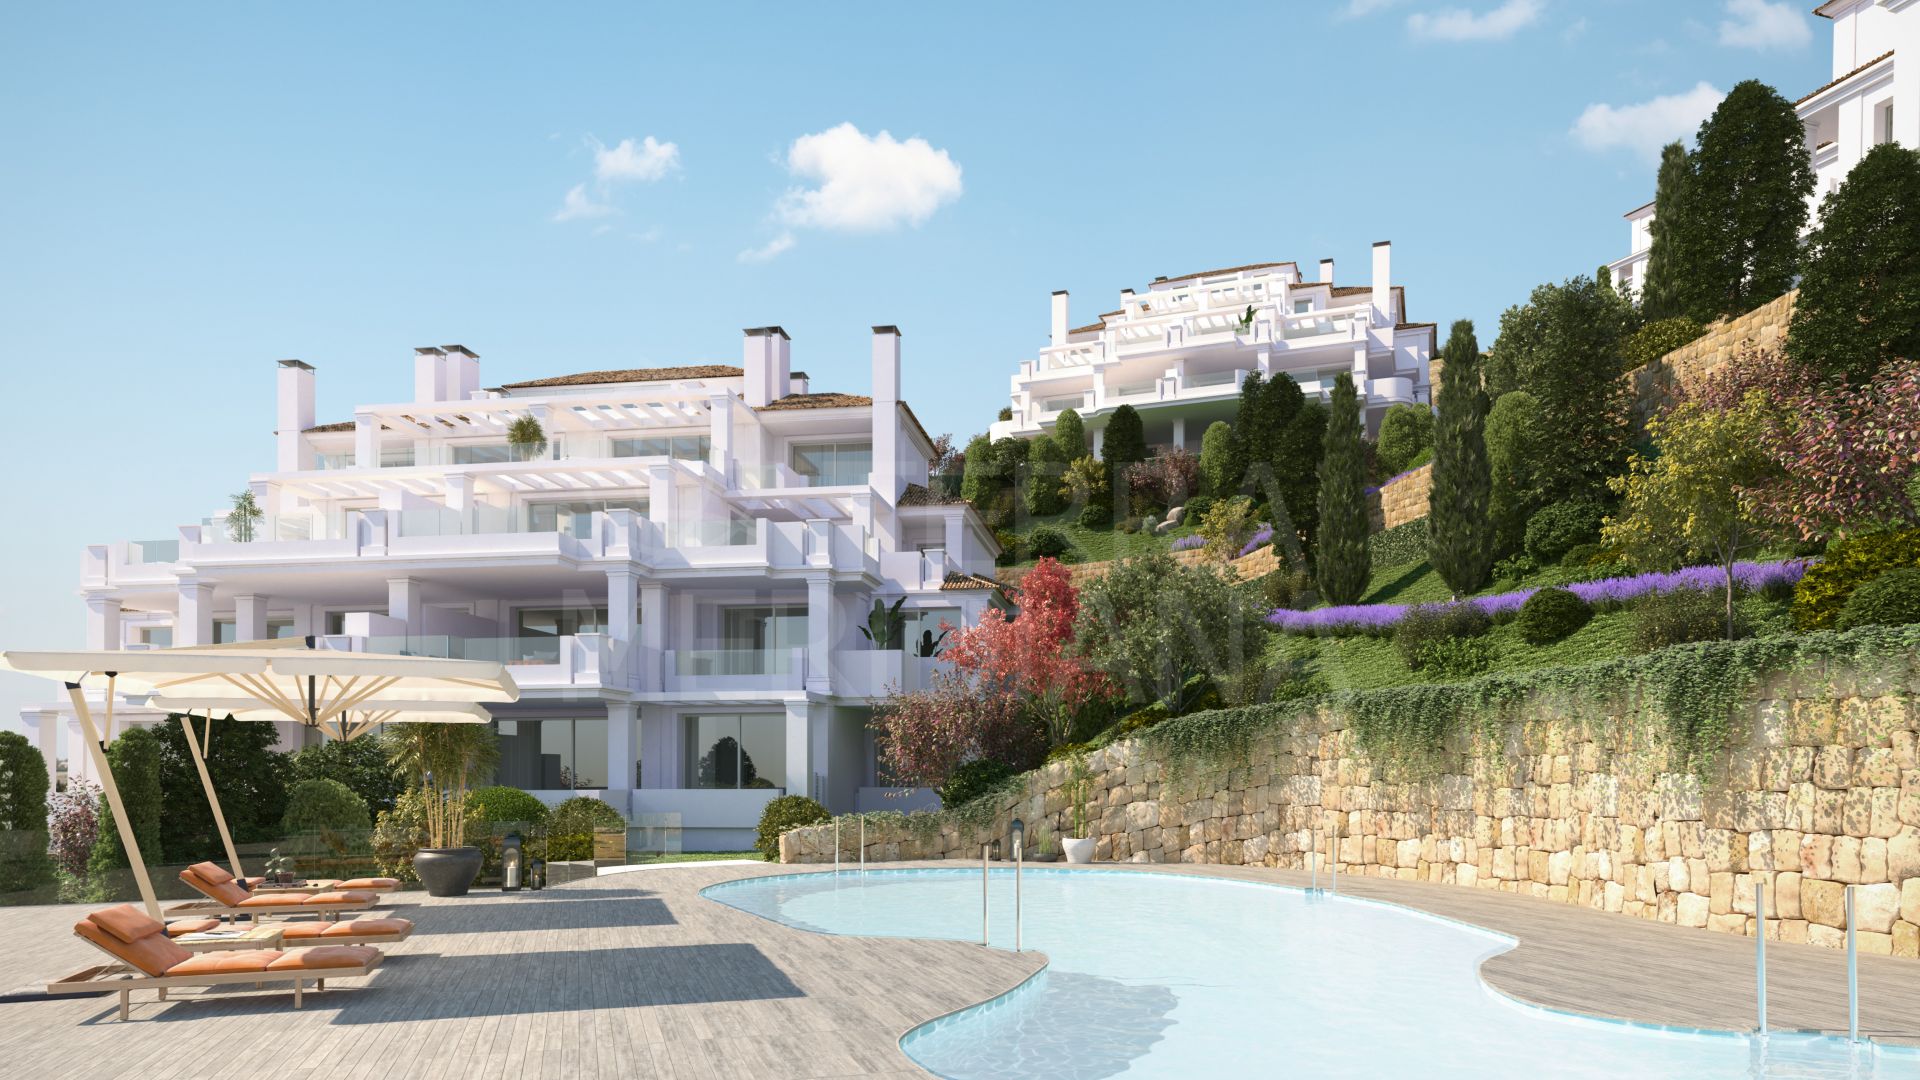 9 Lions Residences, Nueva Andalucia - 9 Lions Residences comprises over 50 apartments across nine villas in Nueva Andalucia